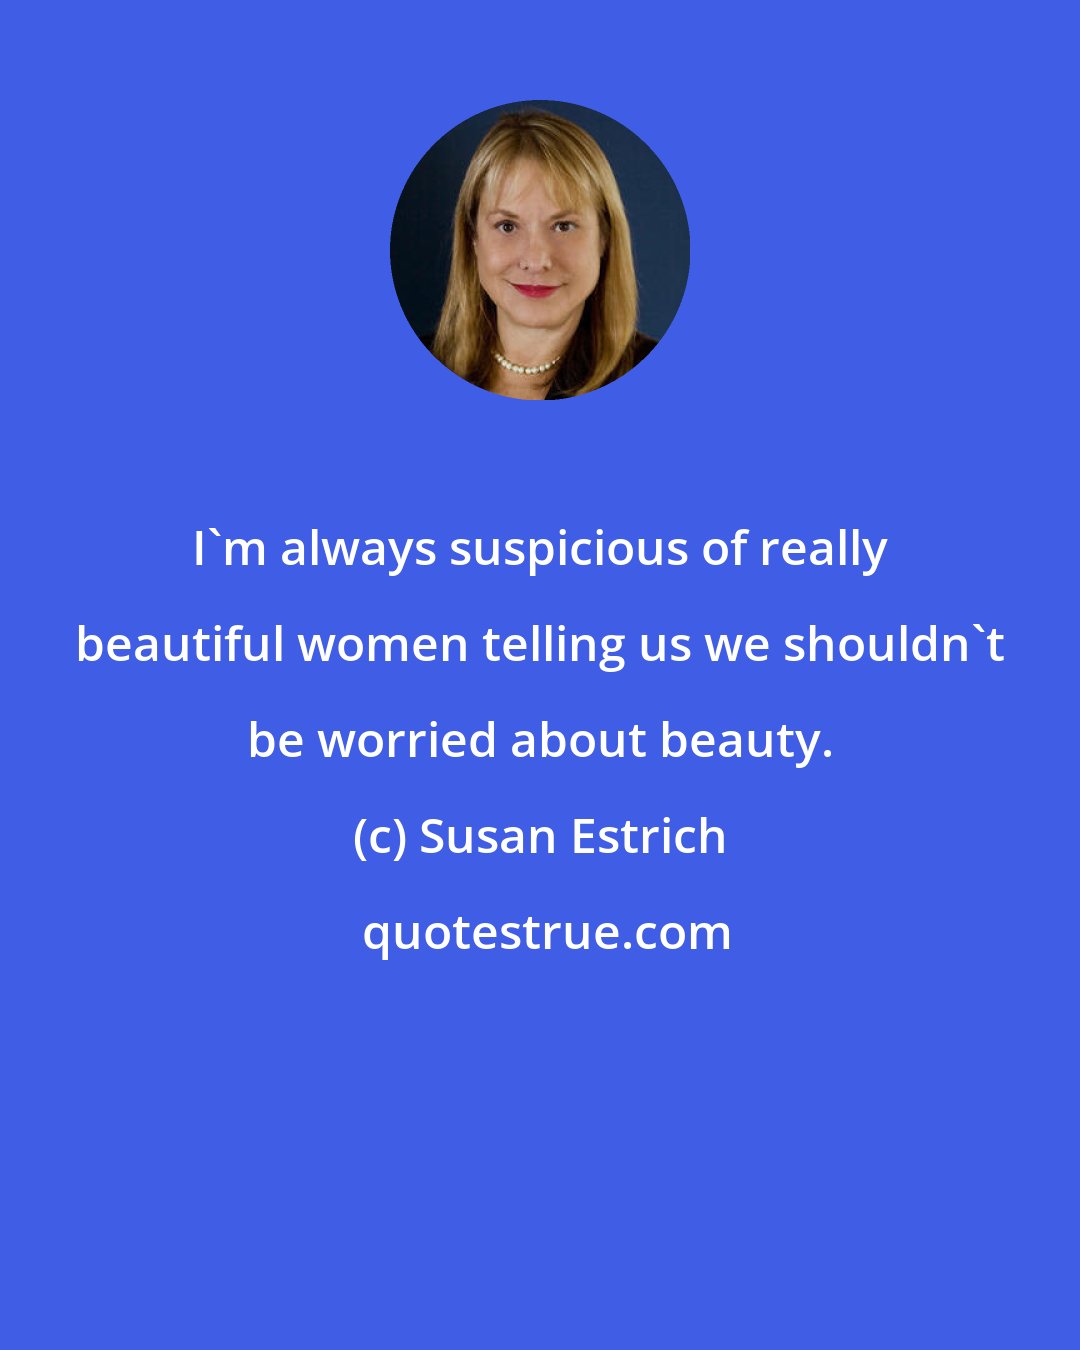 Susan Estrich: I'm always suspicious of really beautiful women telling us we shouldn't be worried about beauty.